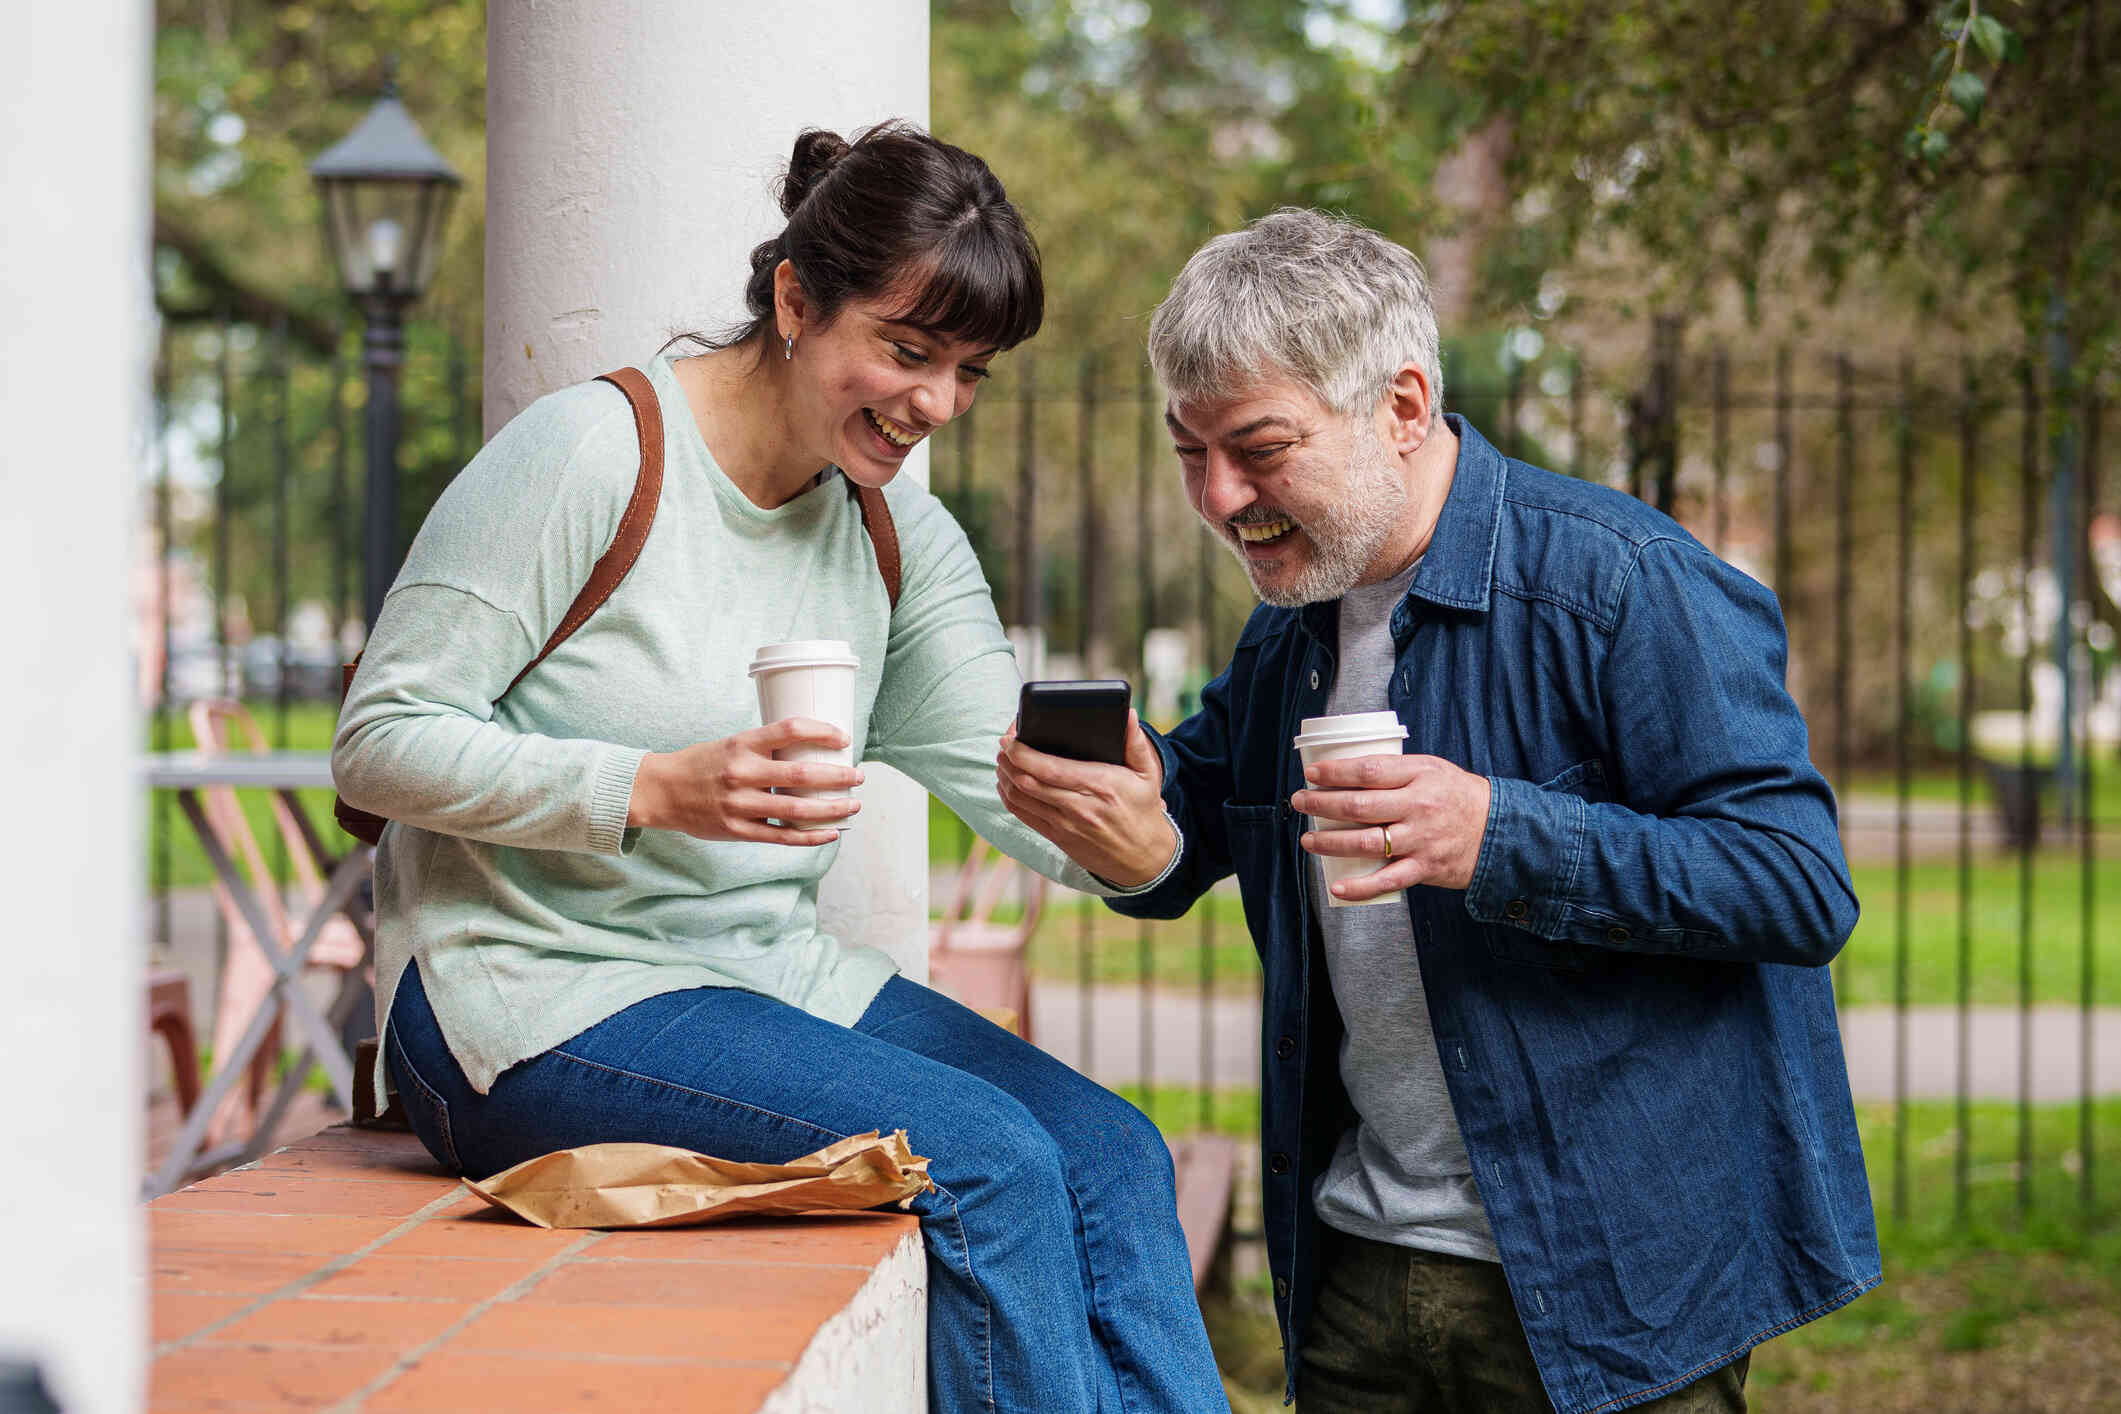 A woman in a greens shirt sits on a ledge while holding a top-go cup and shows the man infront of her her phone as they both smile.